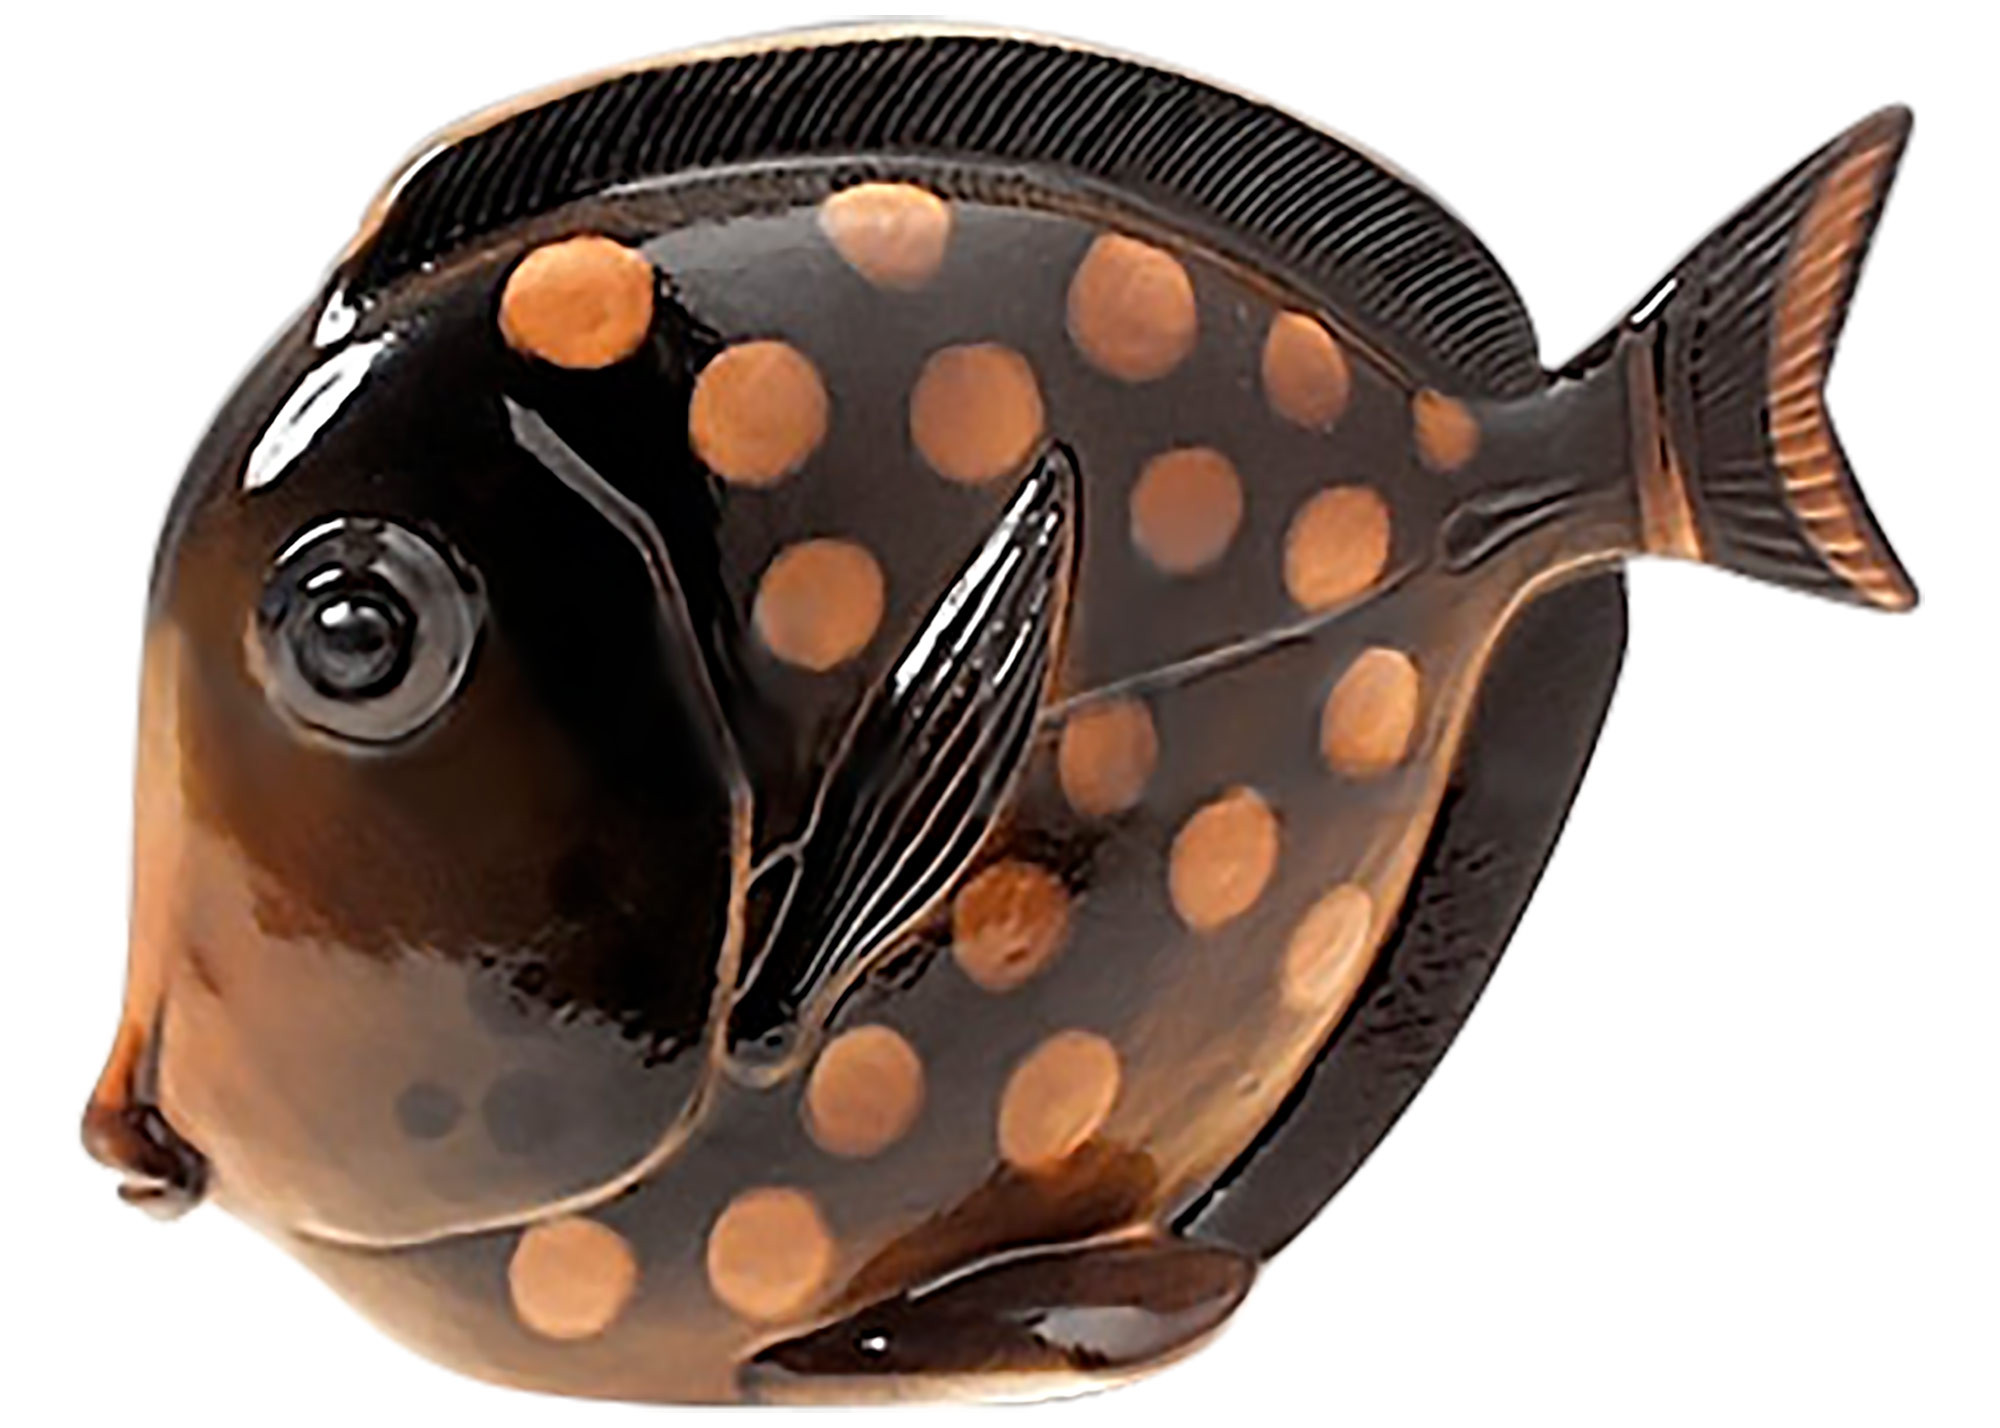 This Lomonosov porcelain Fish figurine provides you with the wonders of the  sea and ocean fish.